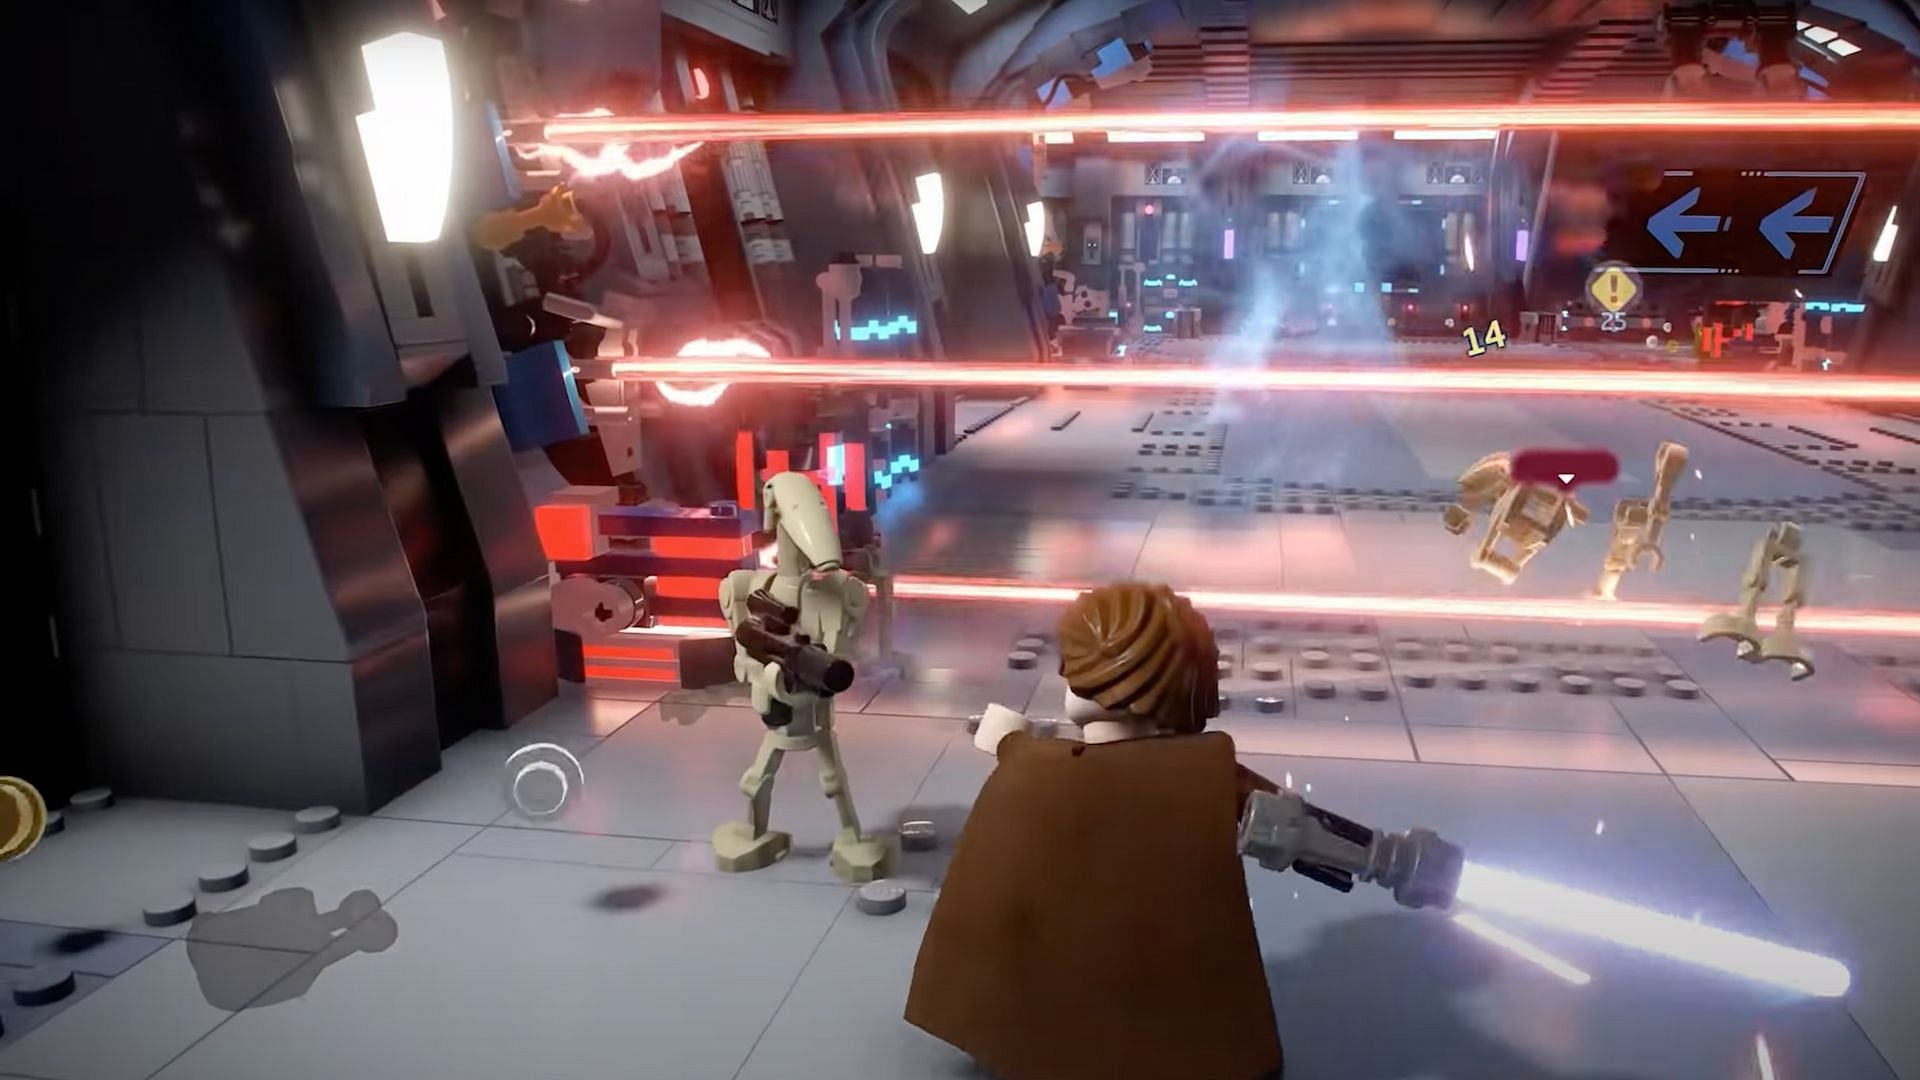 Players of Lego Star Wars: The Skywalker Saga will need to make their way across many platforms in order to complete this challenge (Image via Warner Brothers)